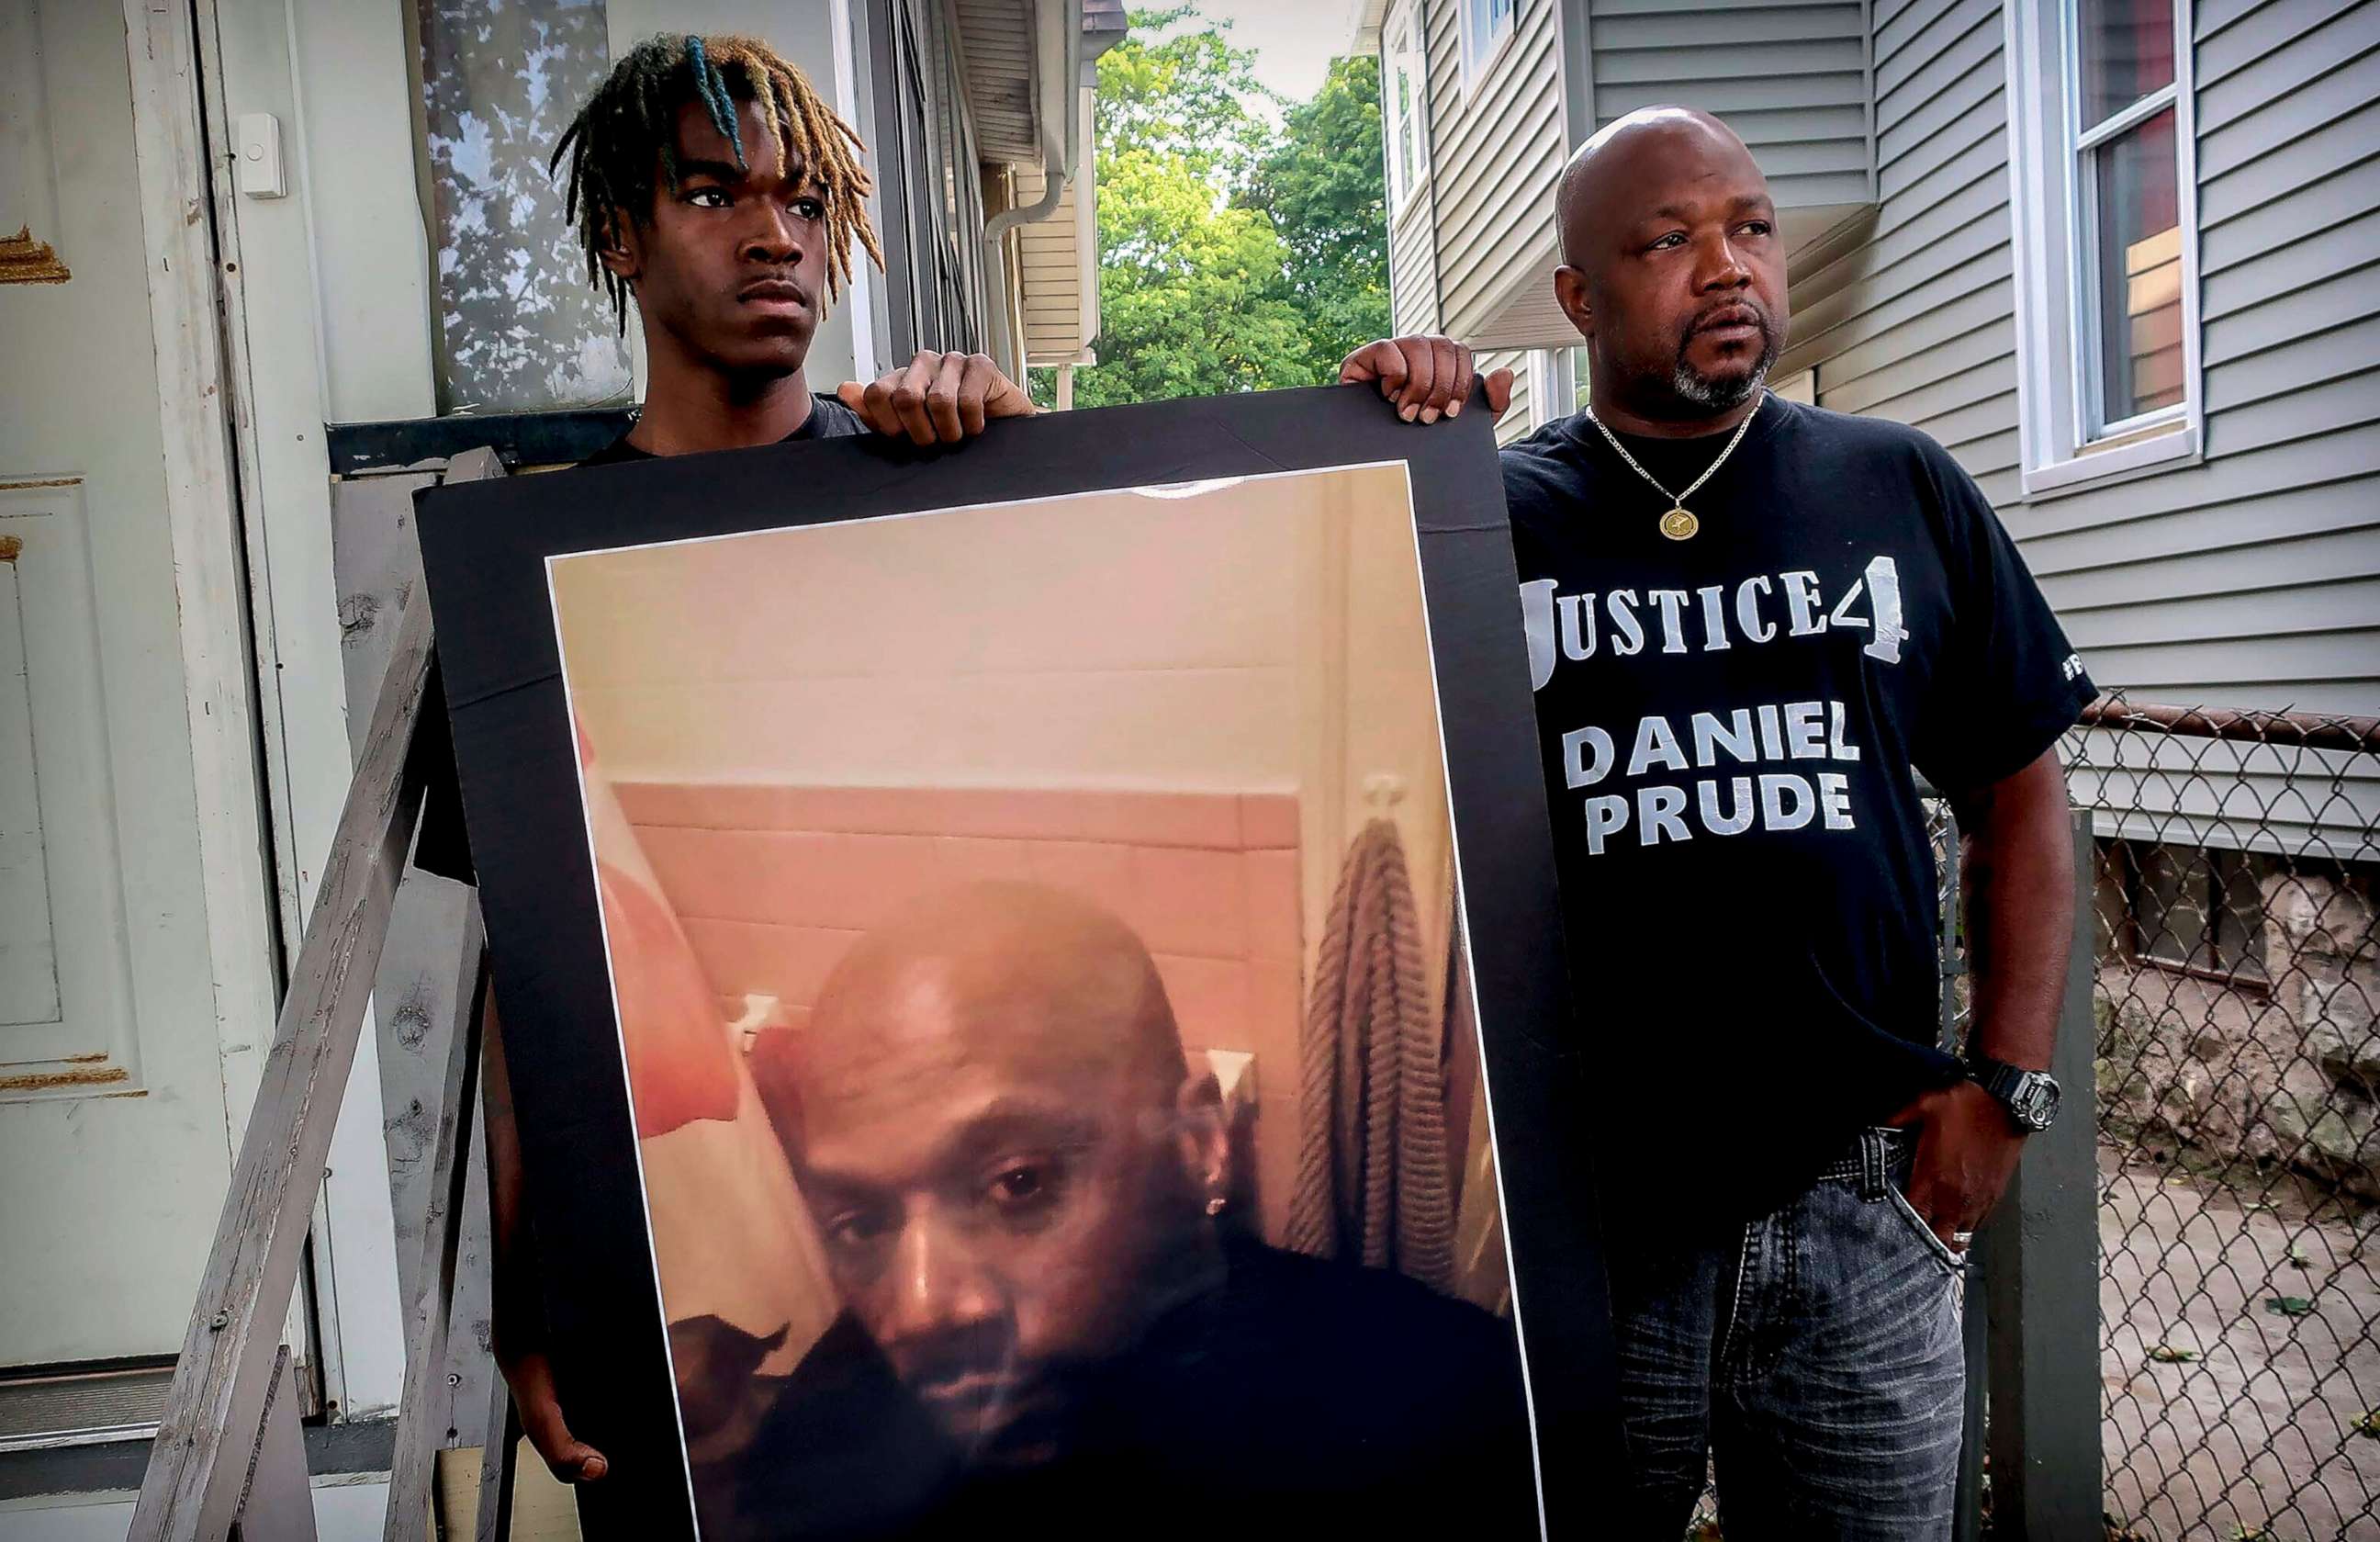 PHOTO: Armin Prude, left, and Joe Prude hold an enlarged photo of Daniel Prude, Sept. 3, 2020, who died following a police encounter, in Rochester, N.Y. 